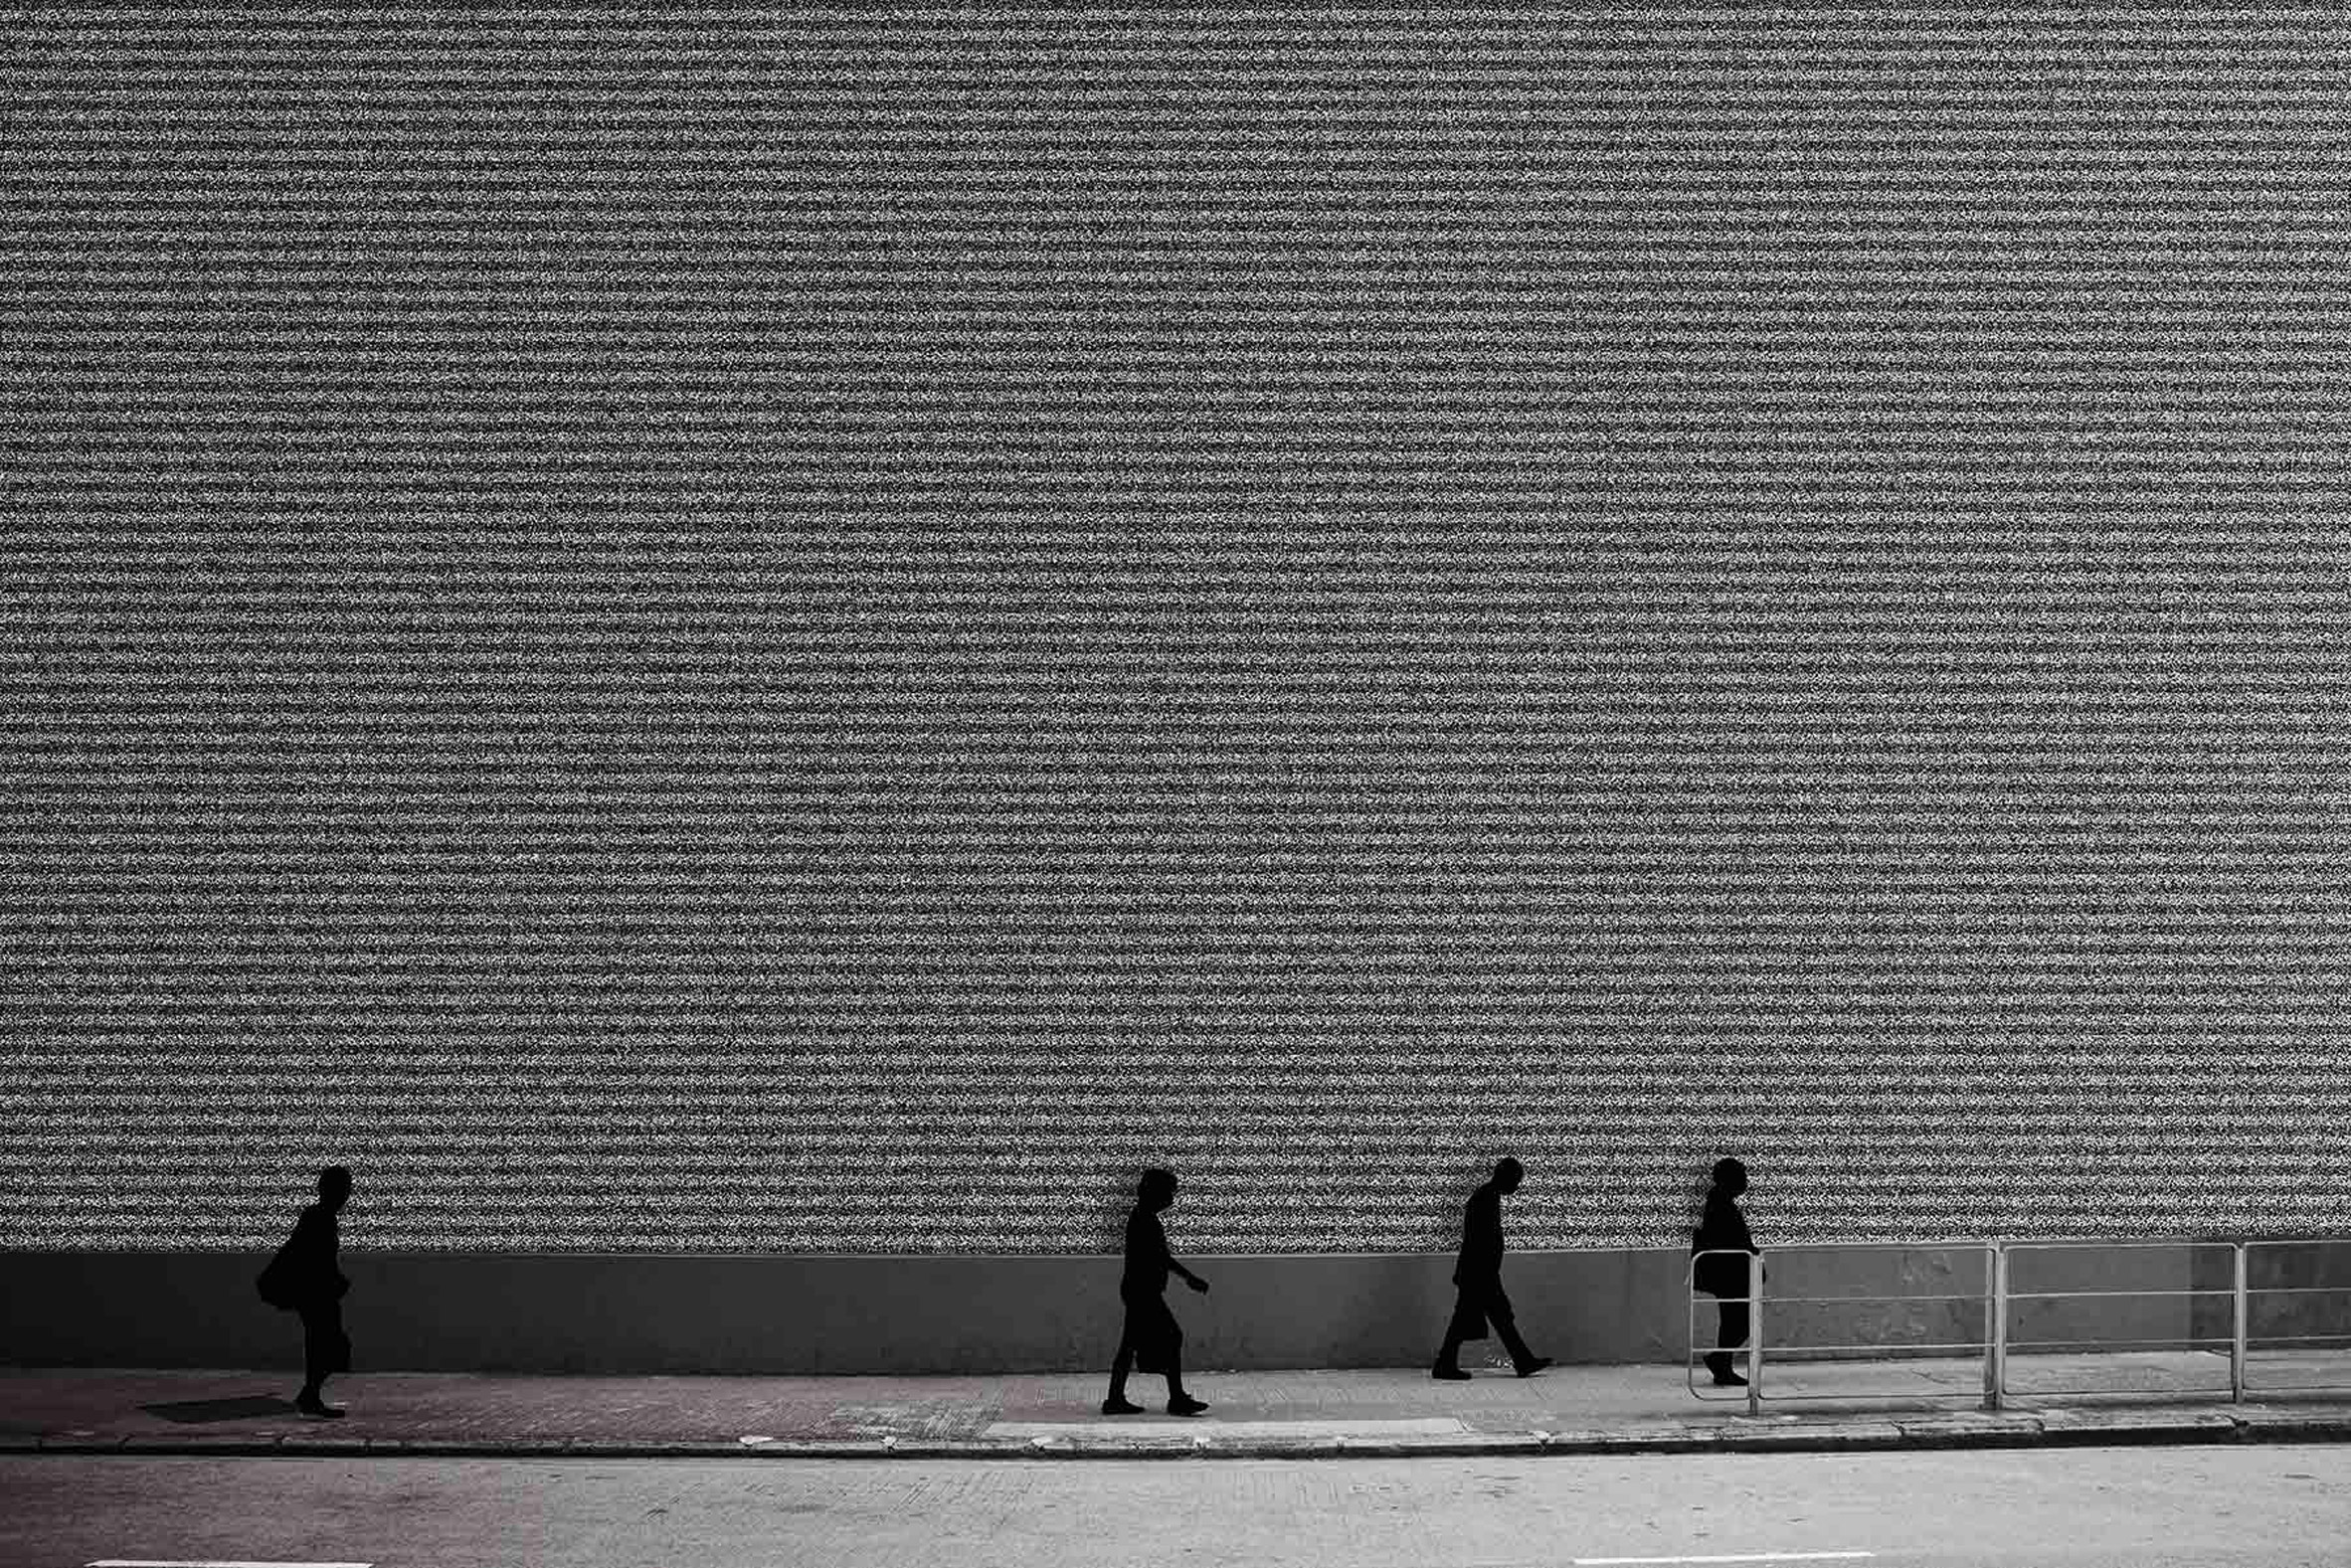 Photograph showing figures walking past a tall wall